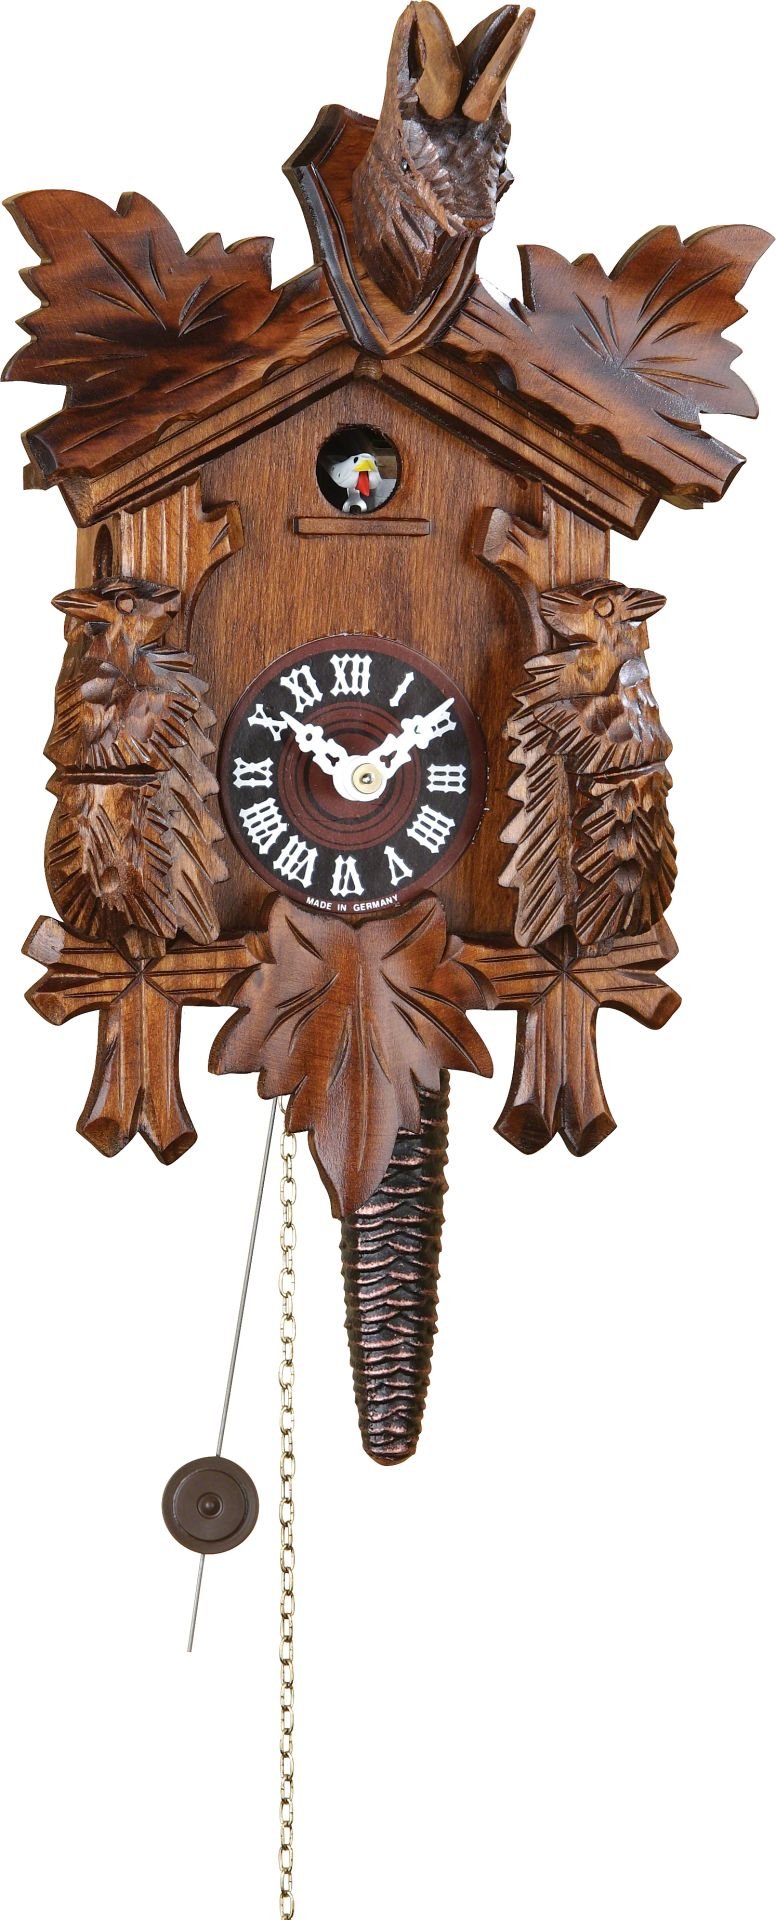 Cuckoo Clock Carved Style chain pull movement 25cm by Trenkle Uhren